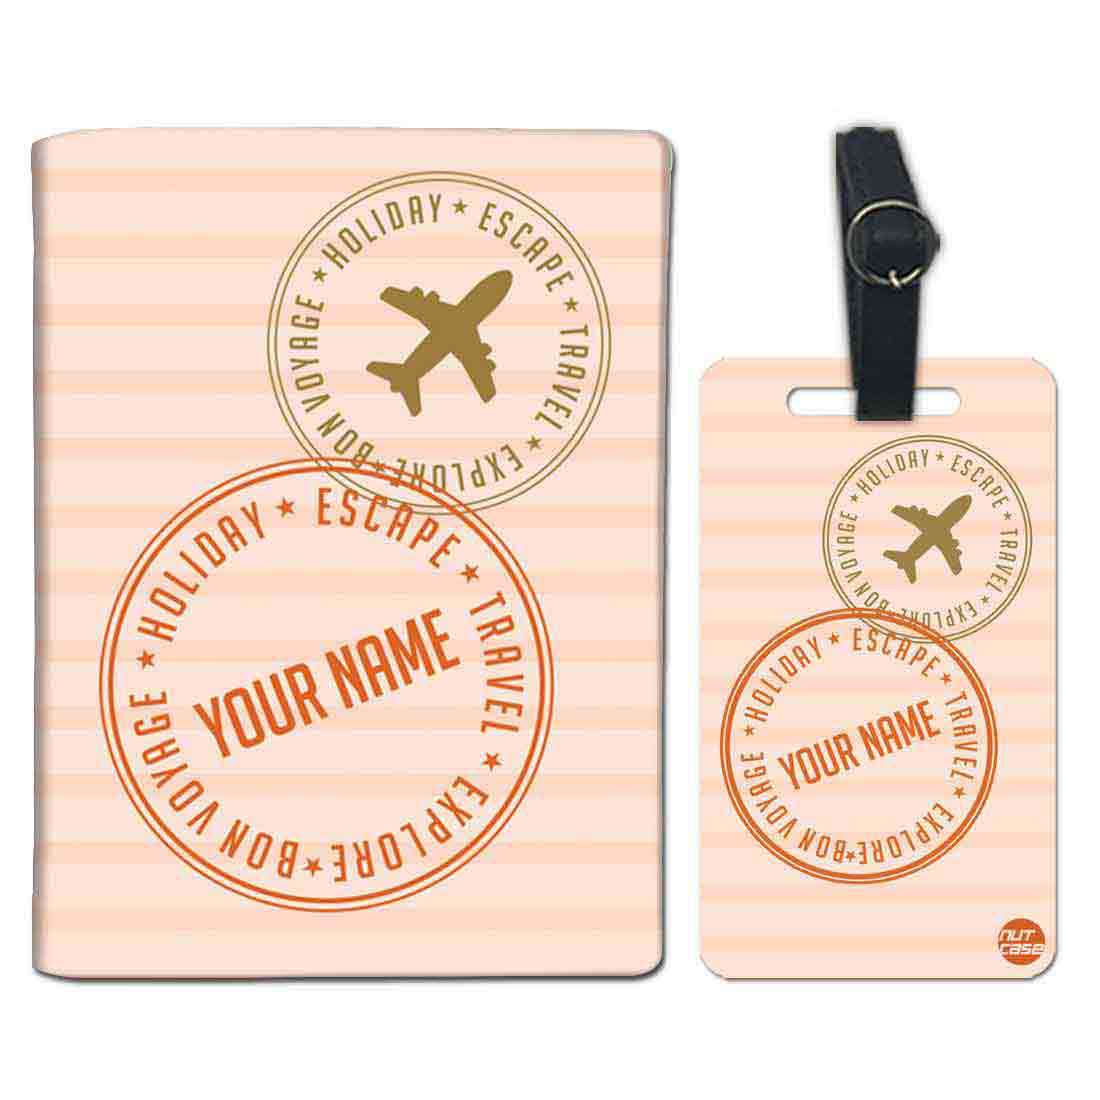 Classy Passport Cover for Him -  Holiday Escape Pink